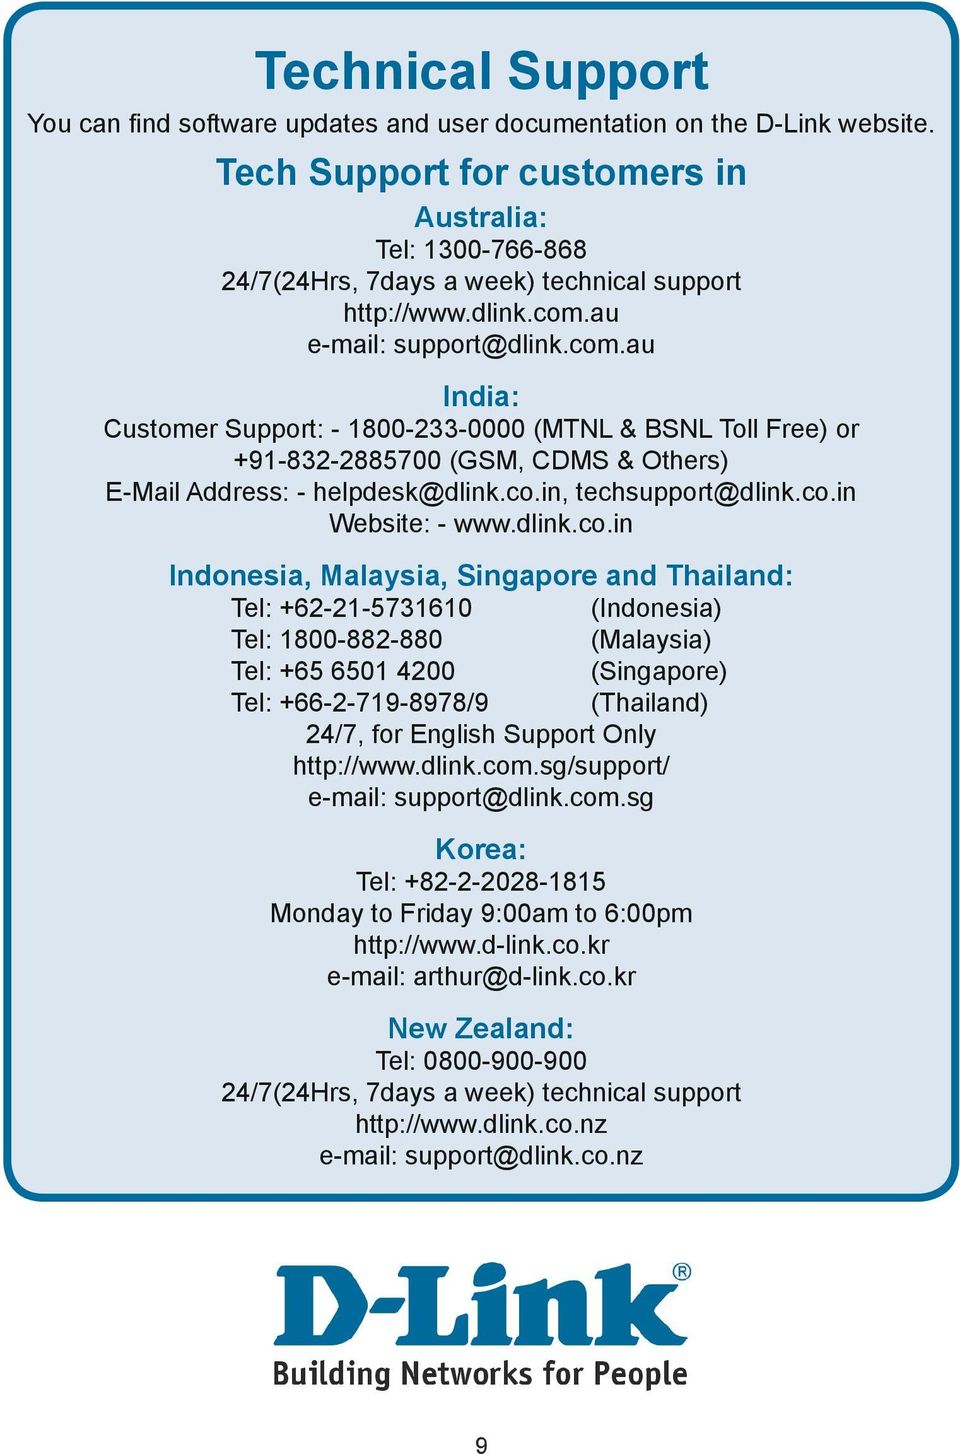 au e-mail: support@dlink.com.au India: Customer Support: - 1800-233-0000 (MTNL & BSNL Toll Free) or +91-832-2885700 (GSM, CDMS & Others) E-Mail Address: - helpdesk@dlink.co.in, techsupport@dlink.co.in Website: - www.